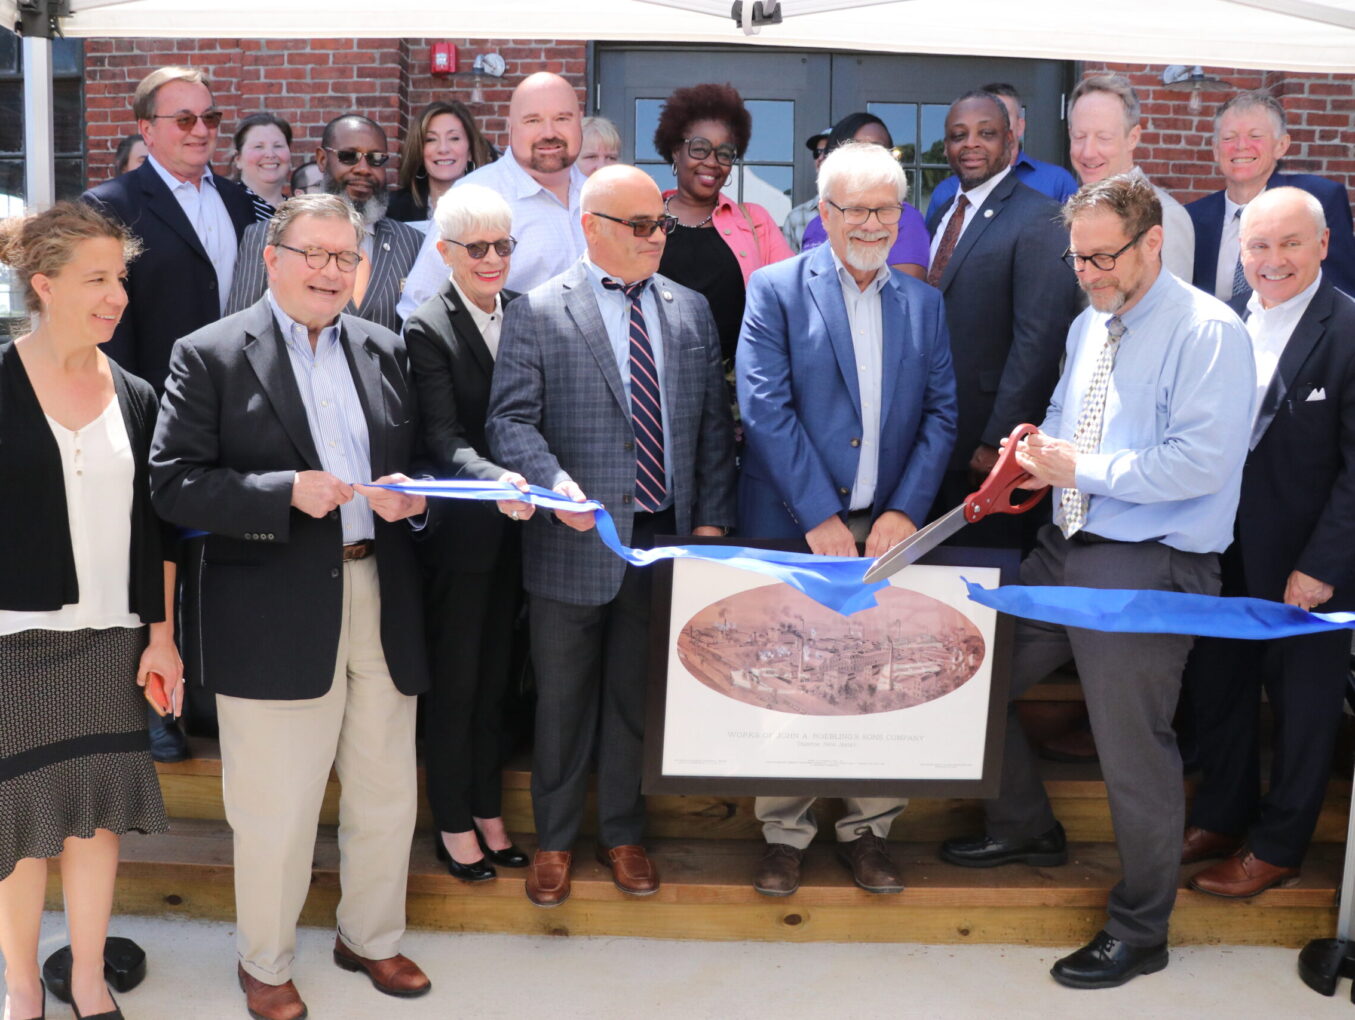 Princeton Hydro Celebrates HQ Move to Historically Redeveloped Building in Trenton